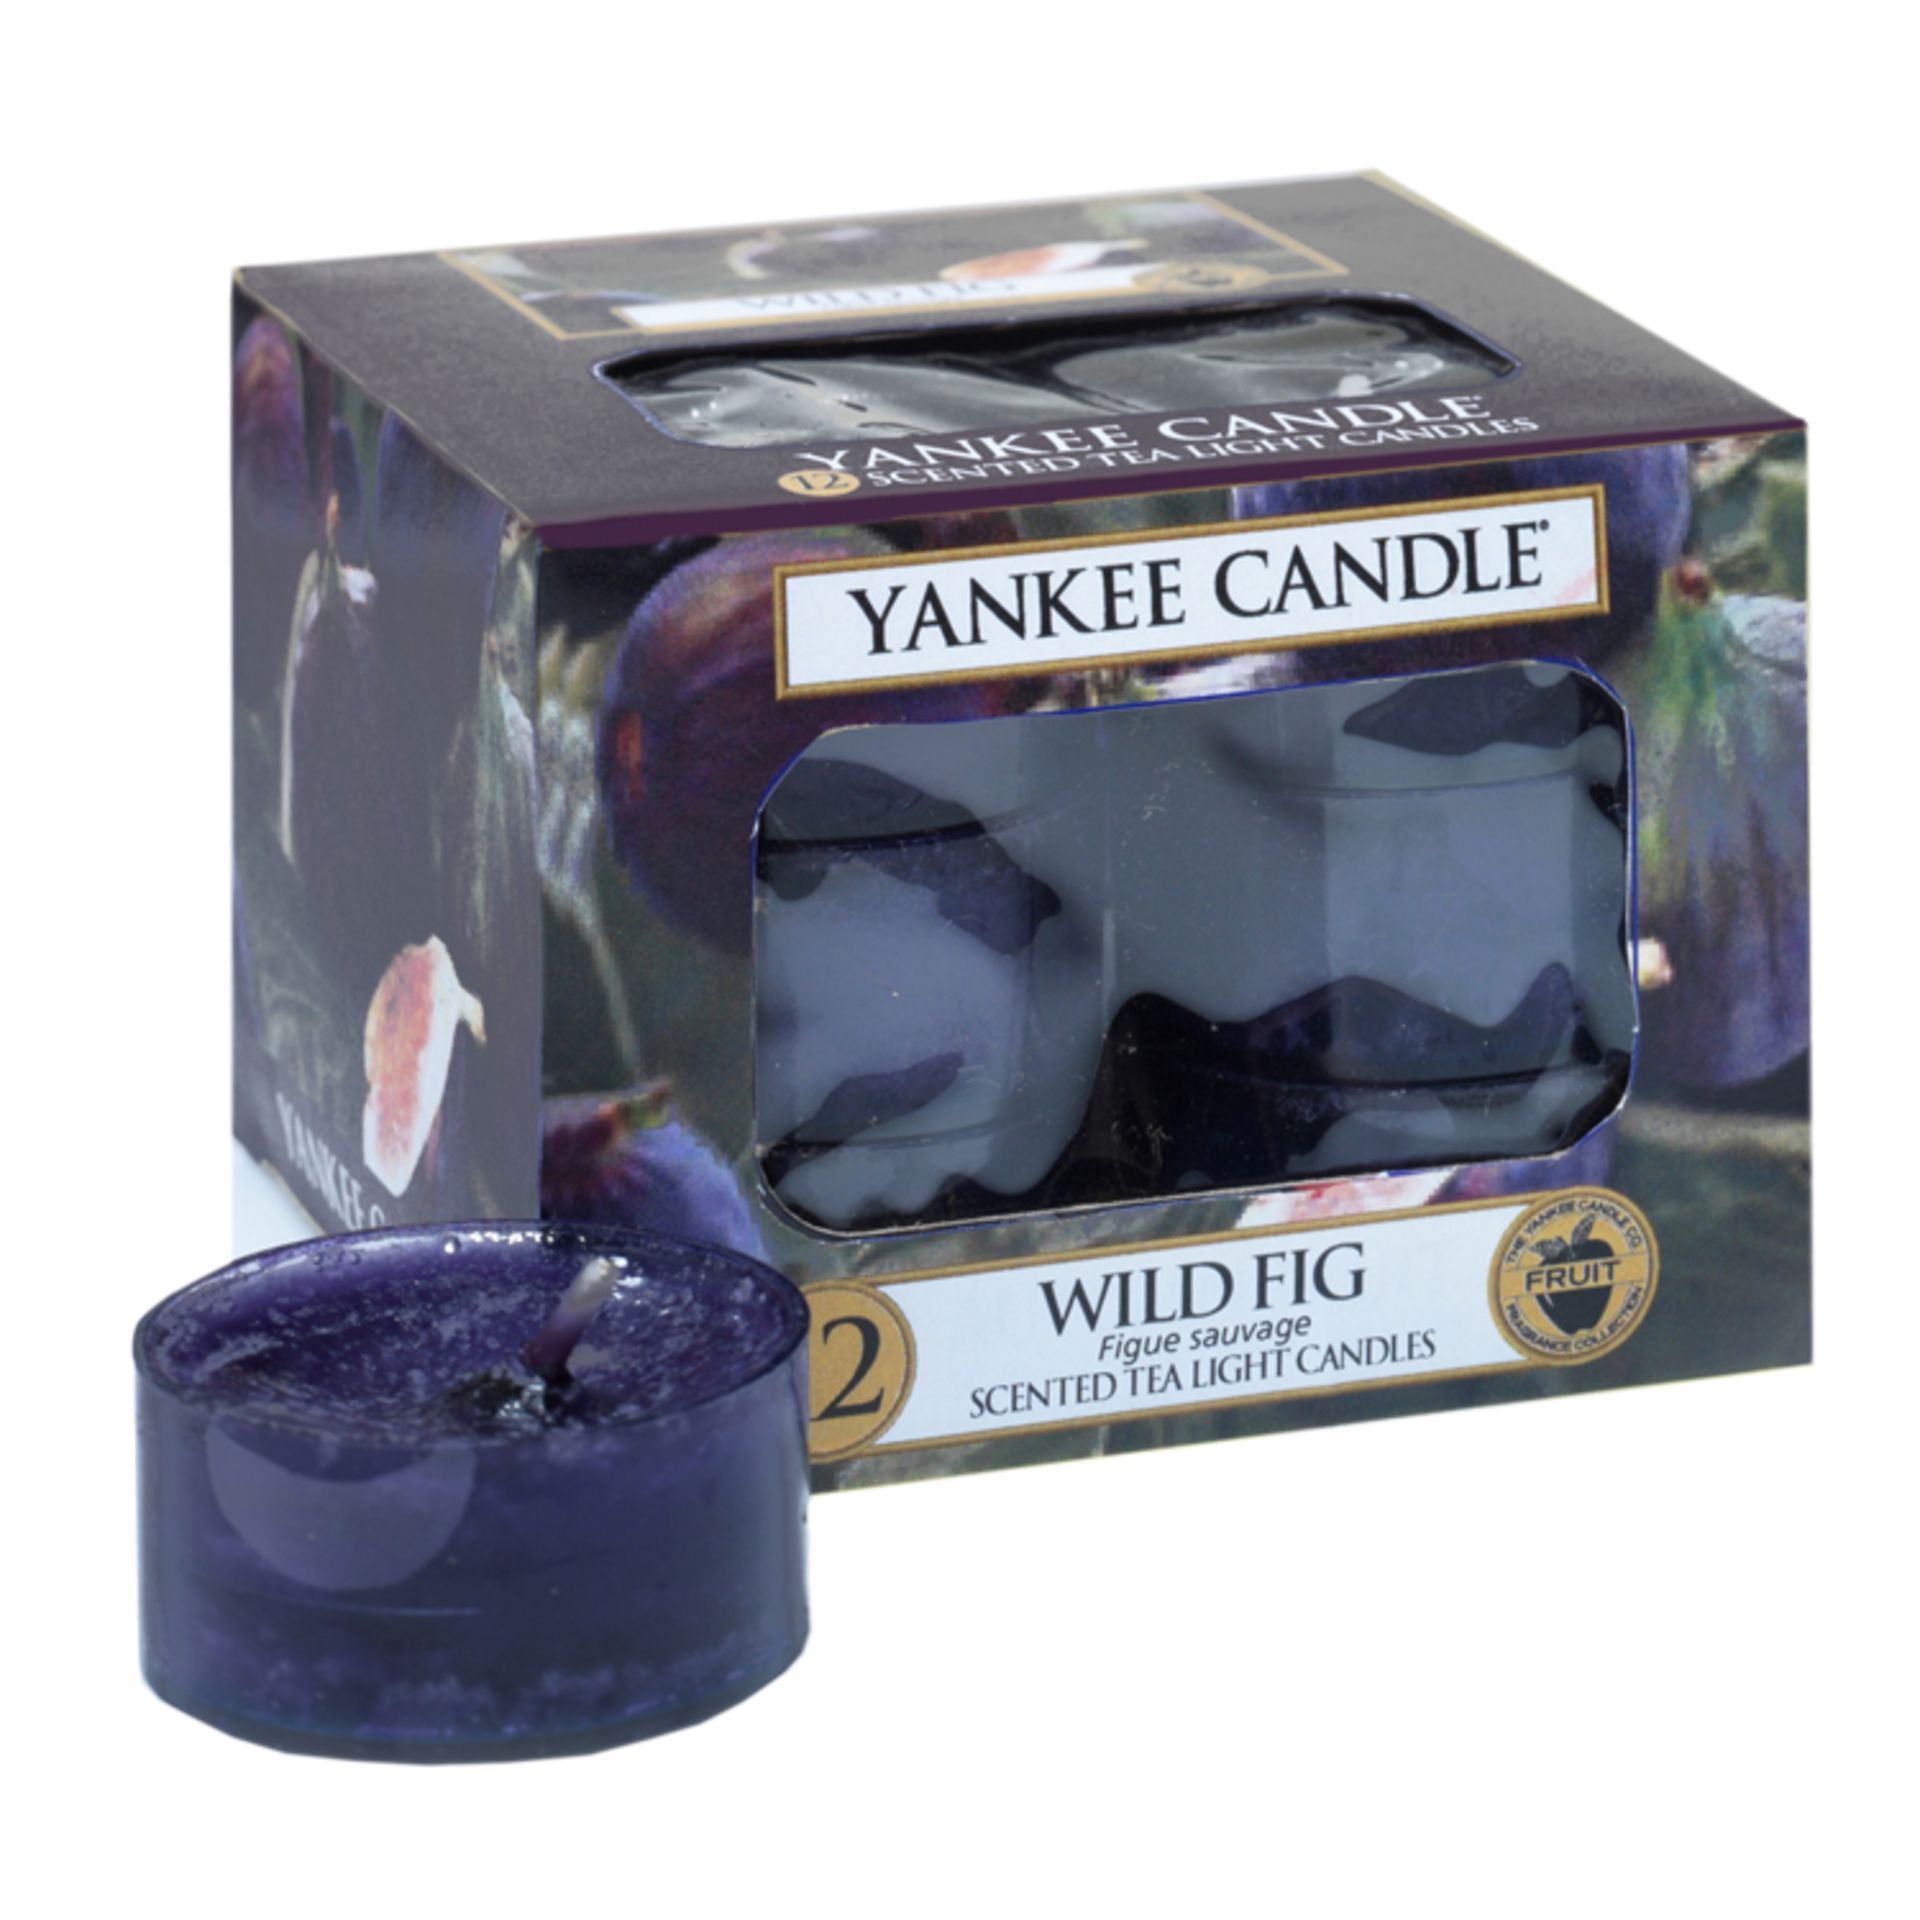 V *TRADE QTY* Brand New 12 Yankee Candle Scented Tea Light Candles Wild Fig eBay Price £7.75 X 4